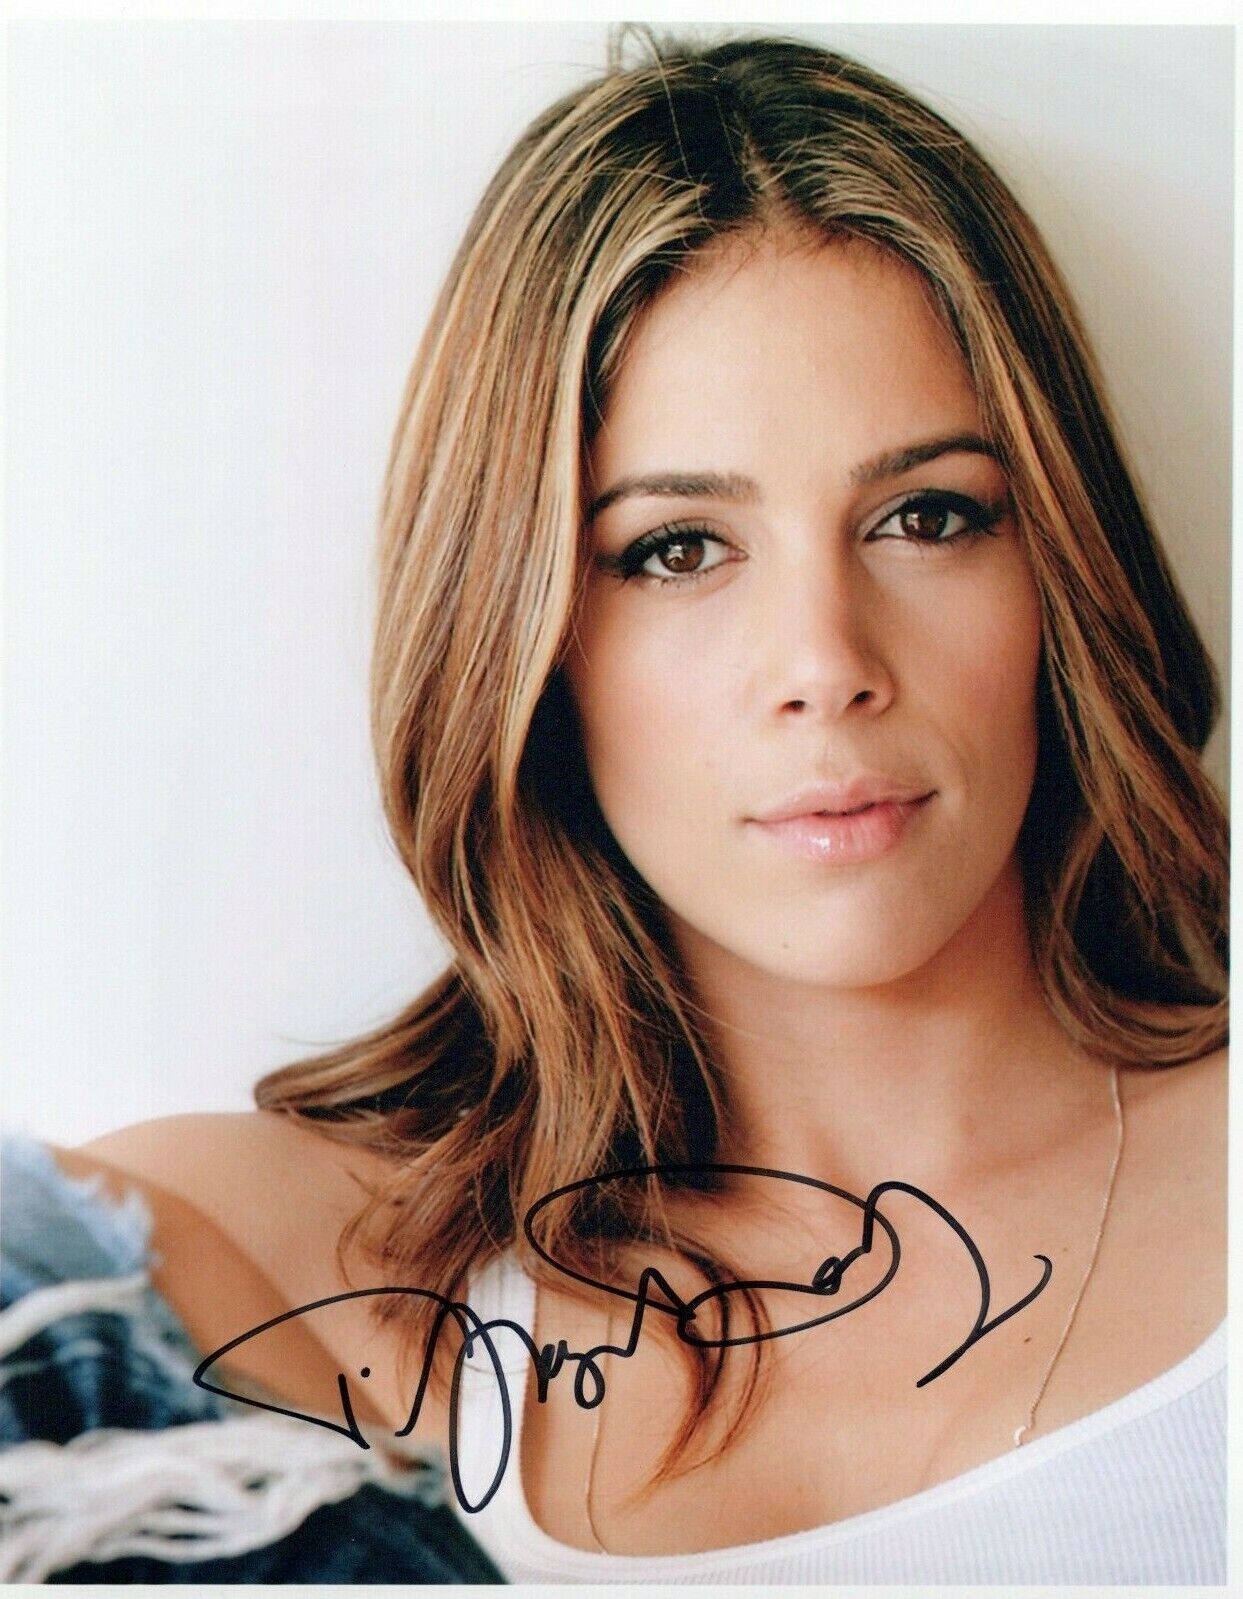 Tiffany Dupont glamour shot autographed Photo Poster painting signed 8x10 #37